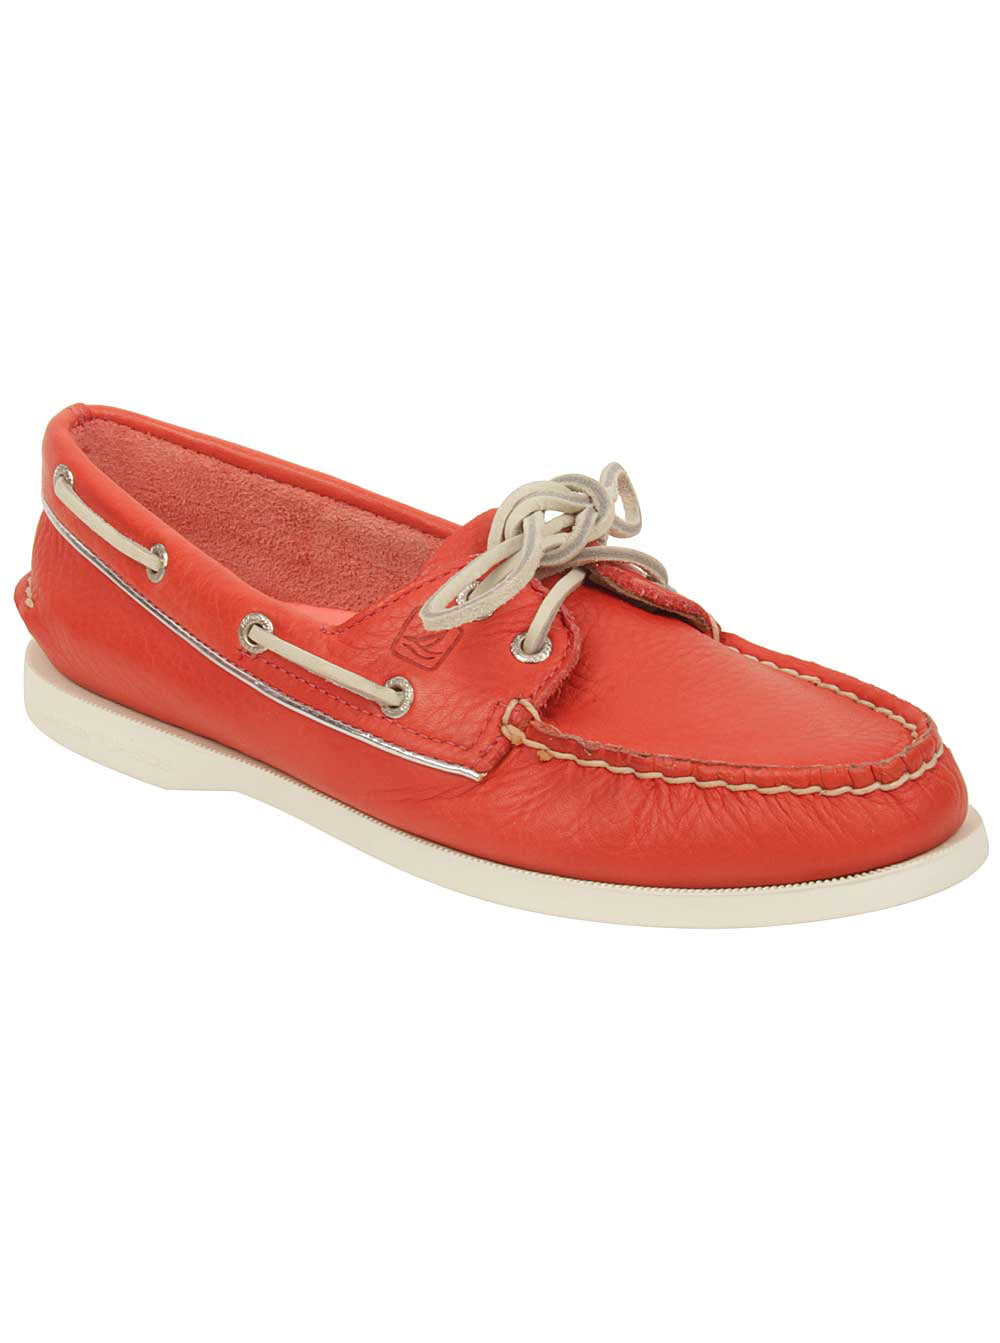 Sperry Top Sider Authentic Orginal 2-Eye Coral/Silver Women's Boat Shoes 9265638 